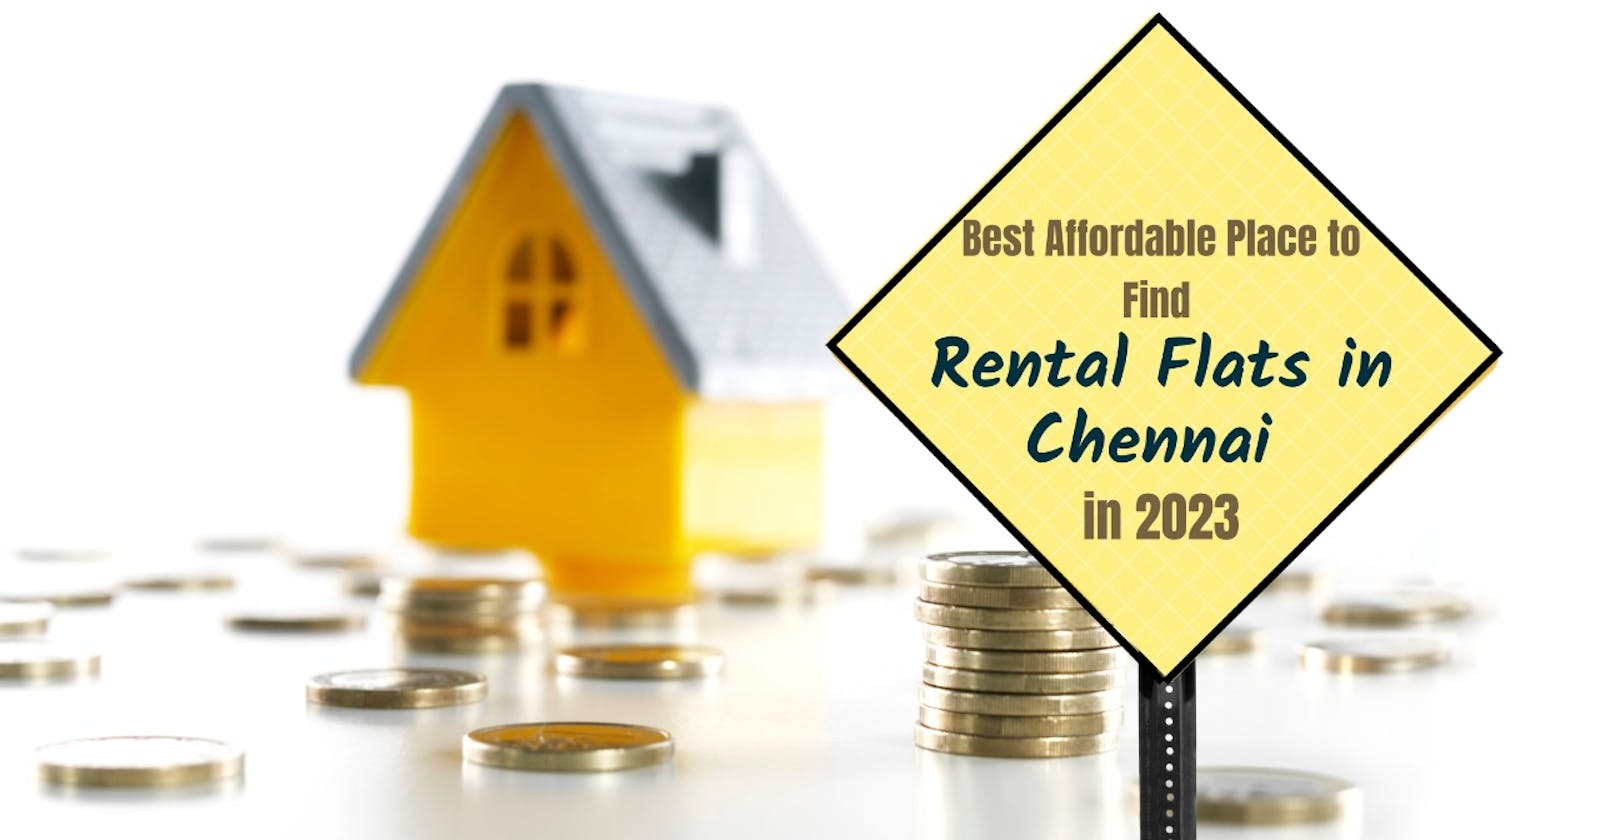 Best Affordable Place to Find Rental Flats in Chennai in 2023